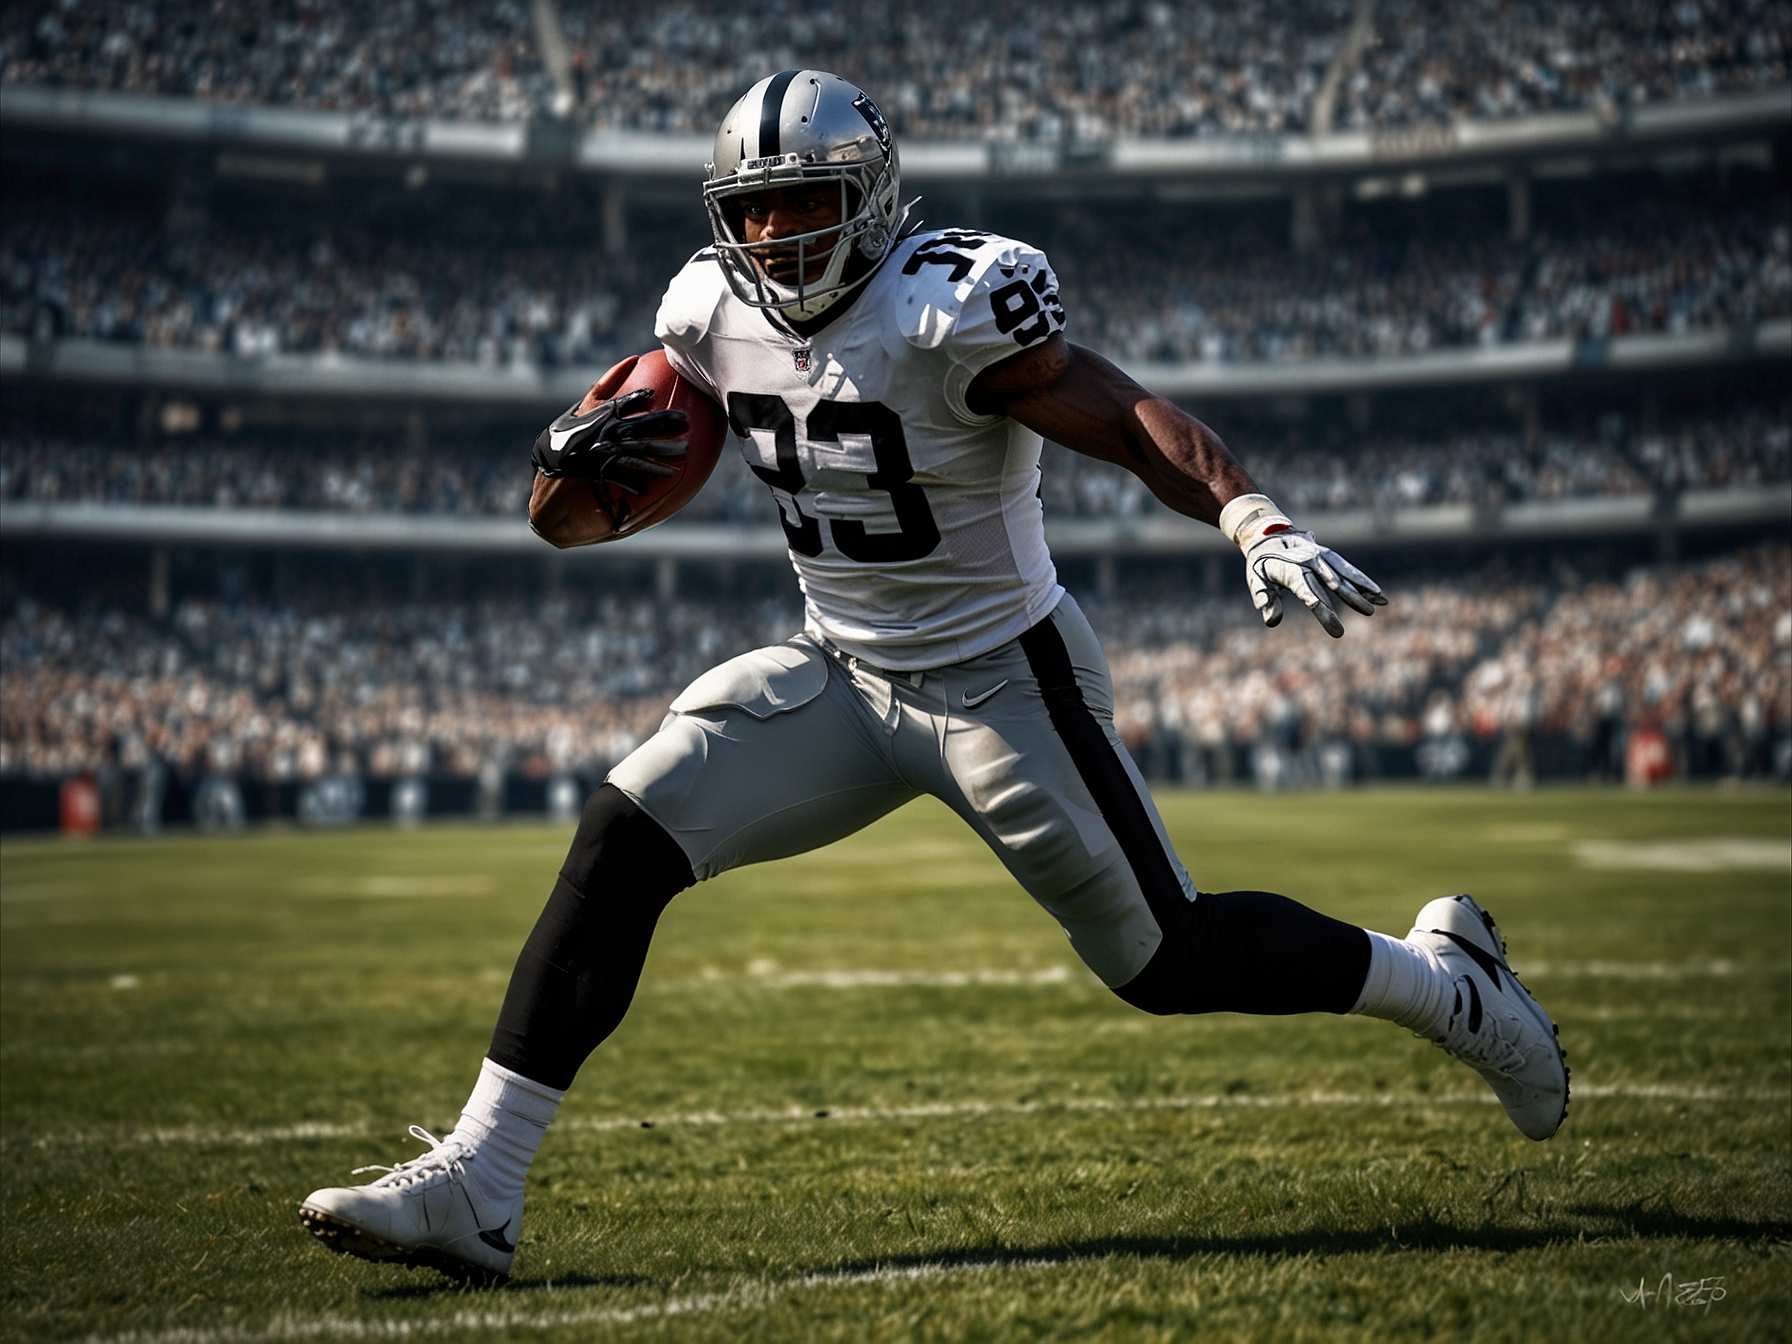 The Raiders' safety in action, showcasing his versatility on the field, making a defensive play during a critical game moment, highlighting his athleticism and football intelligence.